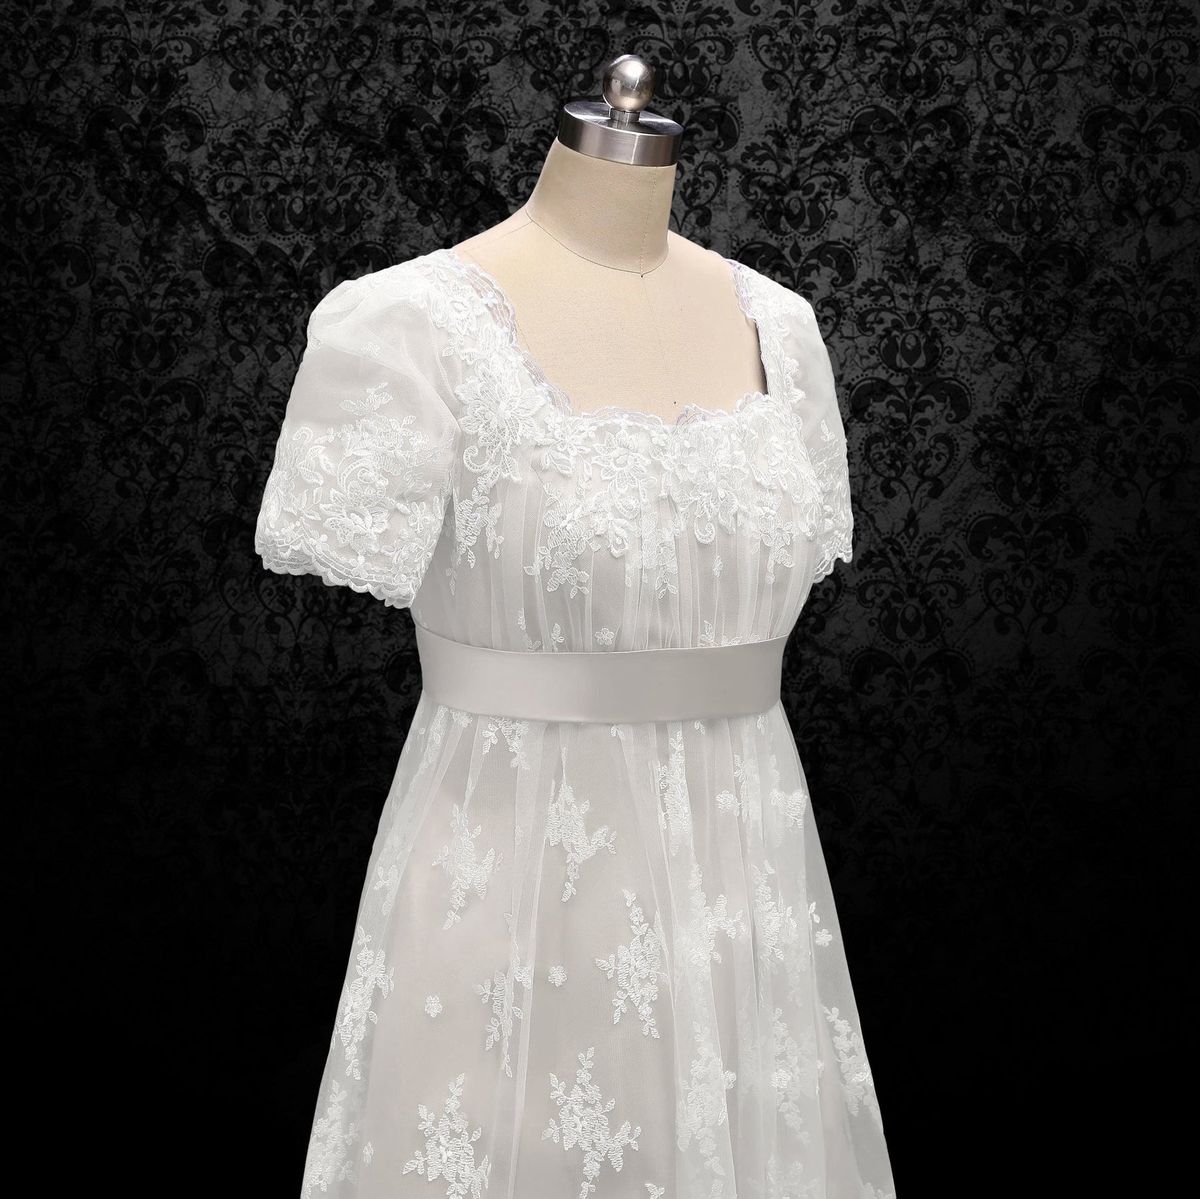 Wonderland By Lilian Plus Size 16 Prom Lace White A-line Dress on Queenly